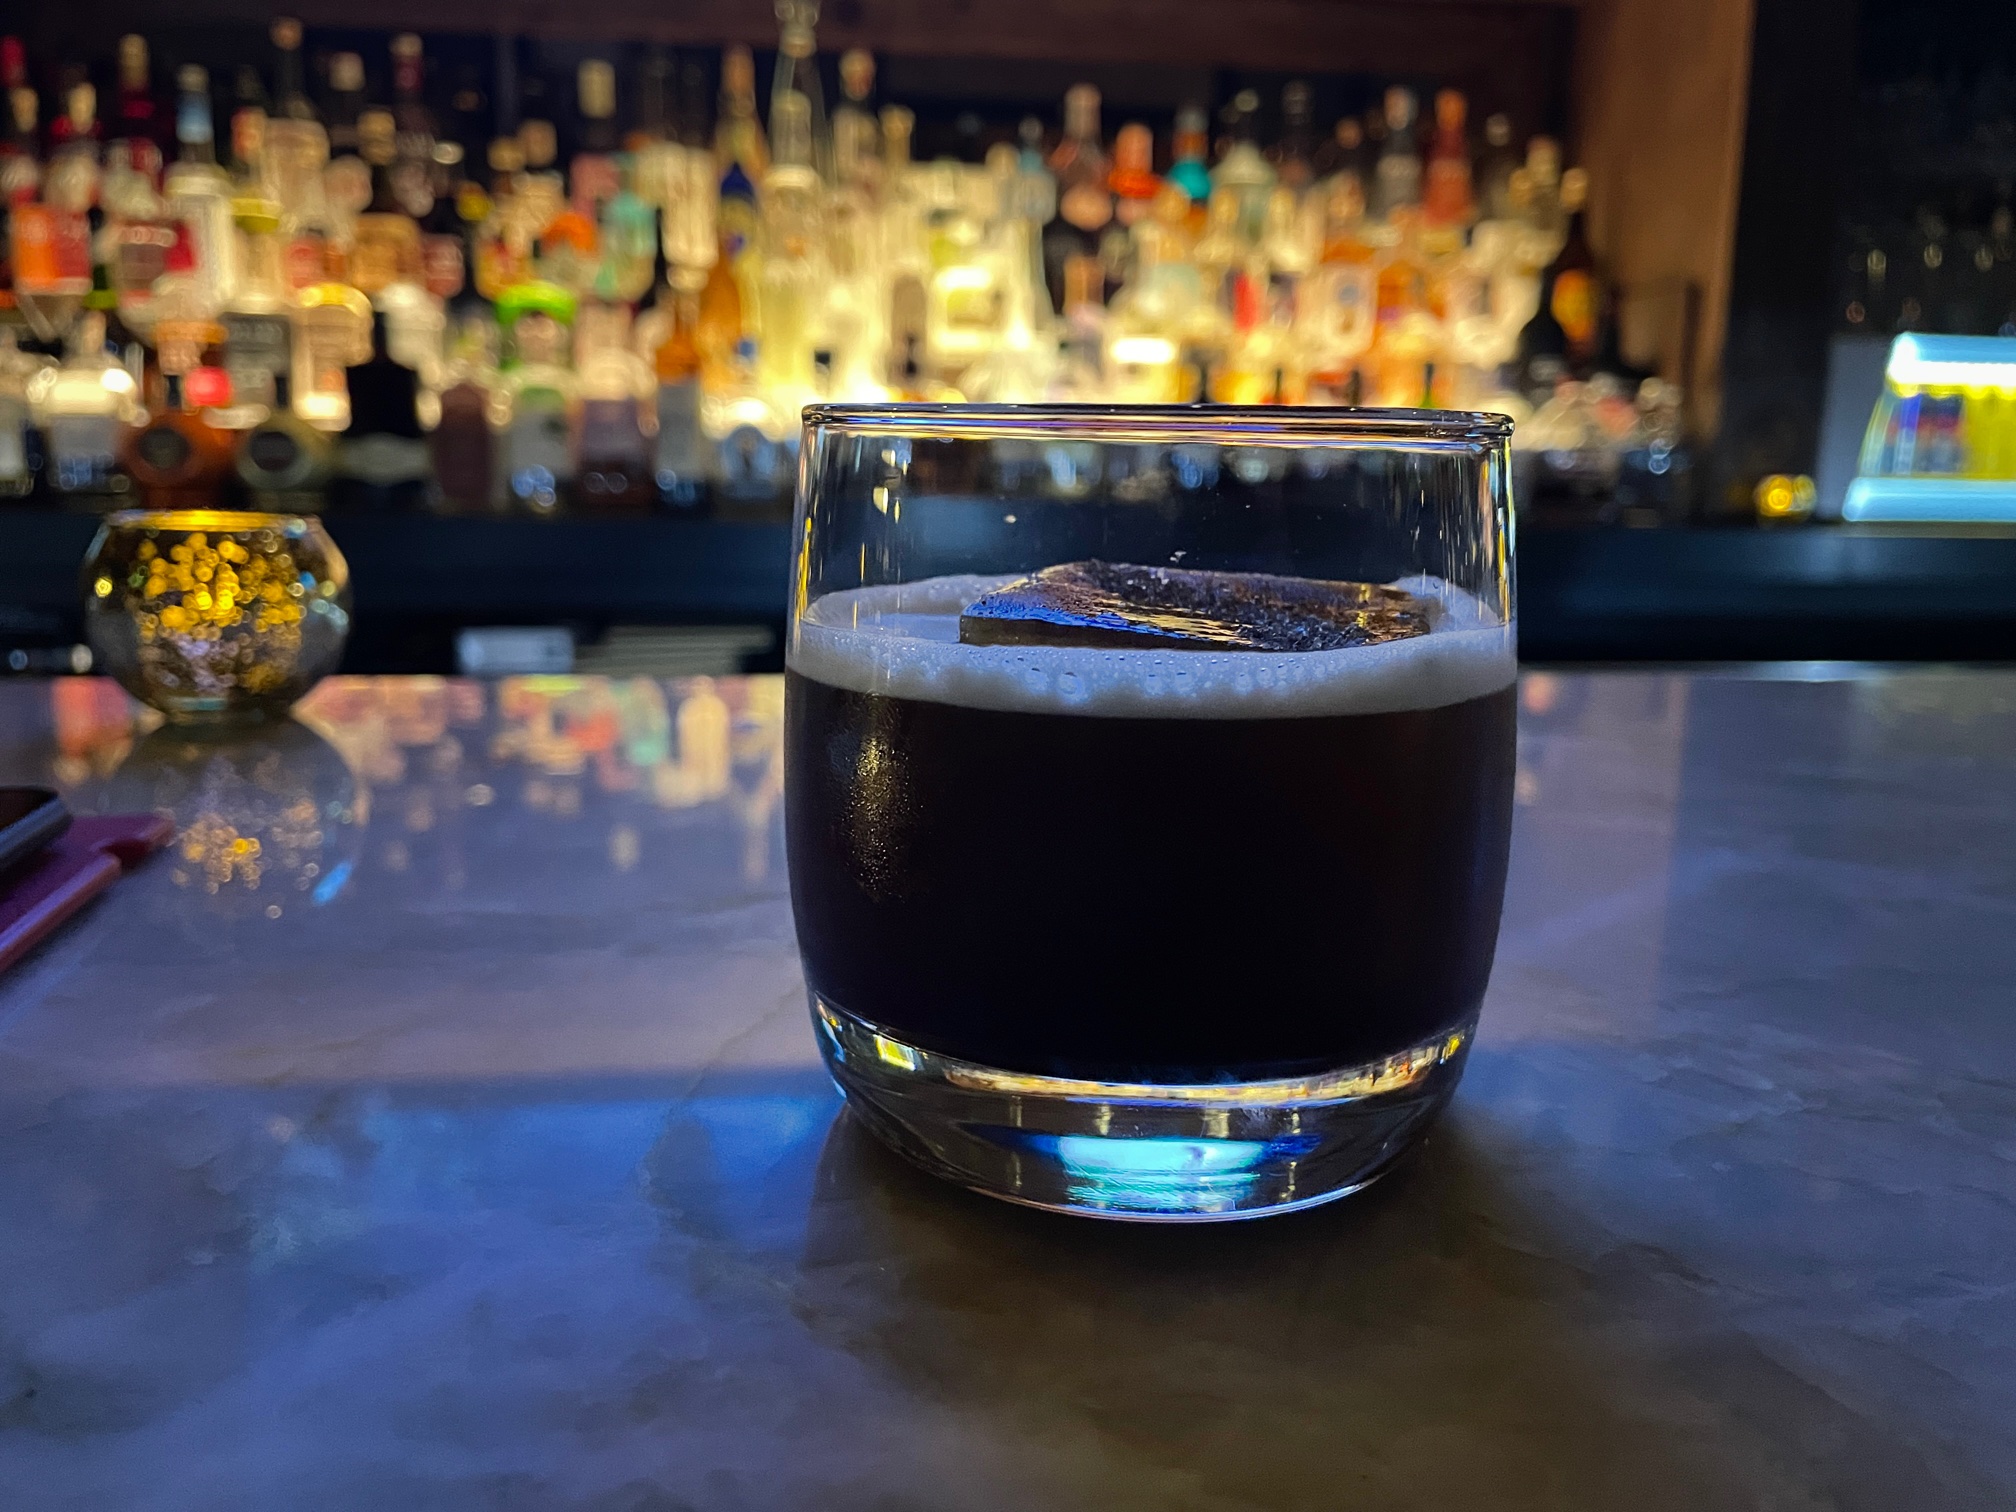 In a dim bar, there is a half glass of a dark cocktail with a large ice cube in it. Behind the glass is the bar's bottles of liquor lit up from underneath. Photo by Alyssa Buckley.